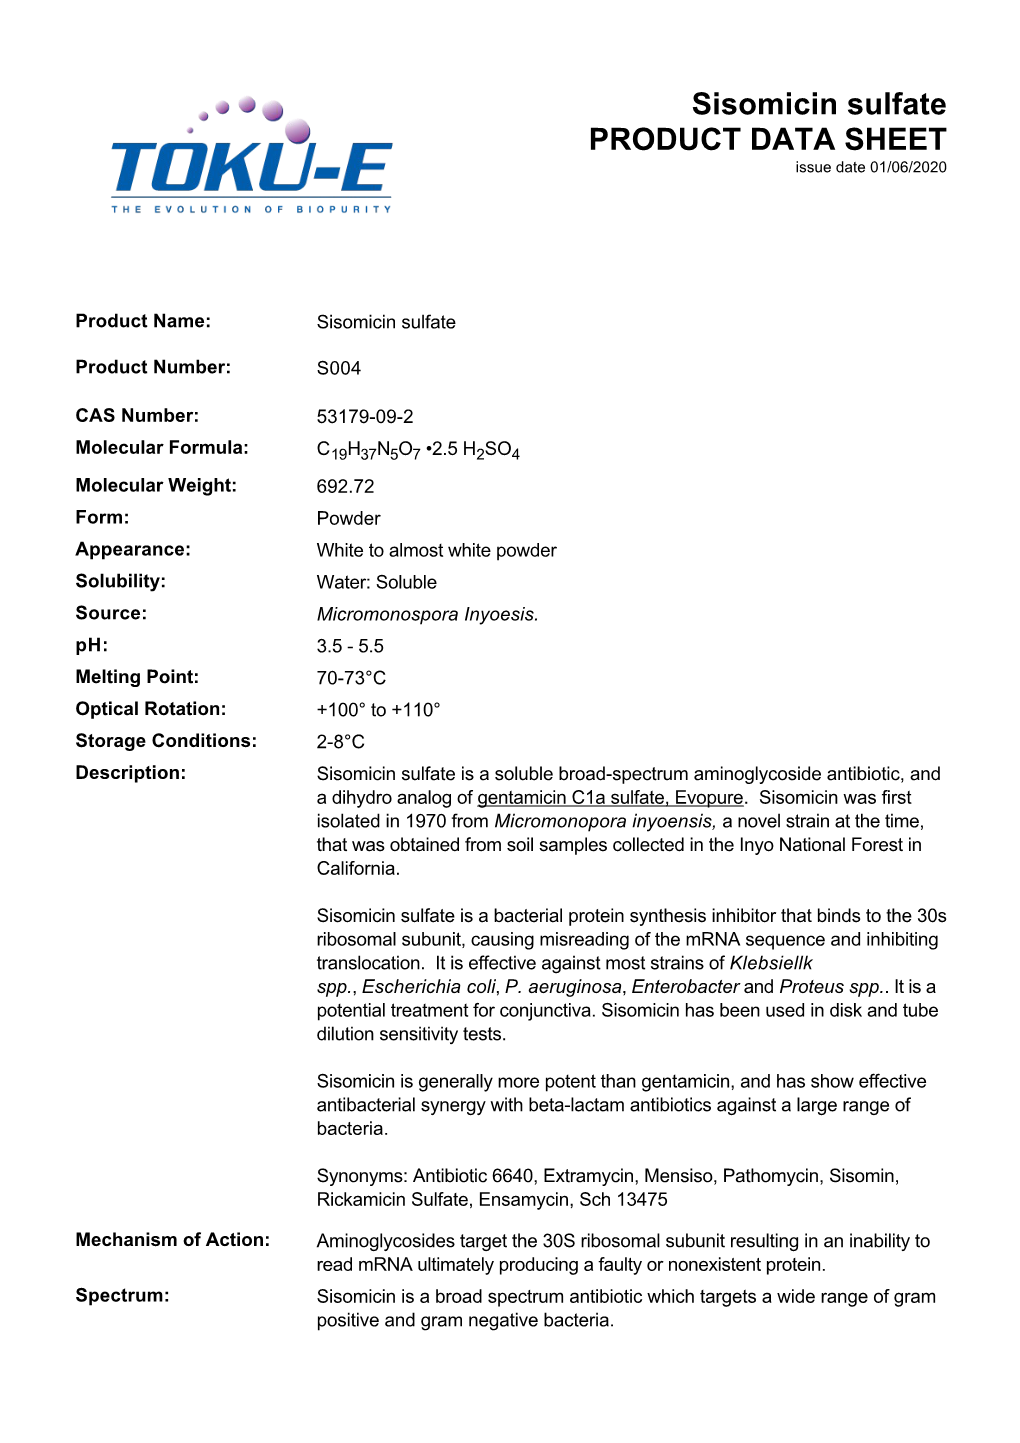 Sisomicin Sulfate PRODUCT DATA SHEET Issue Date 01/06/2020